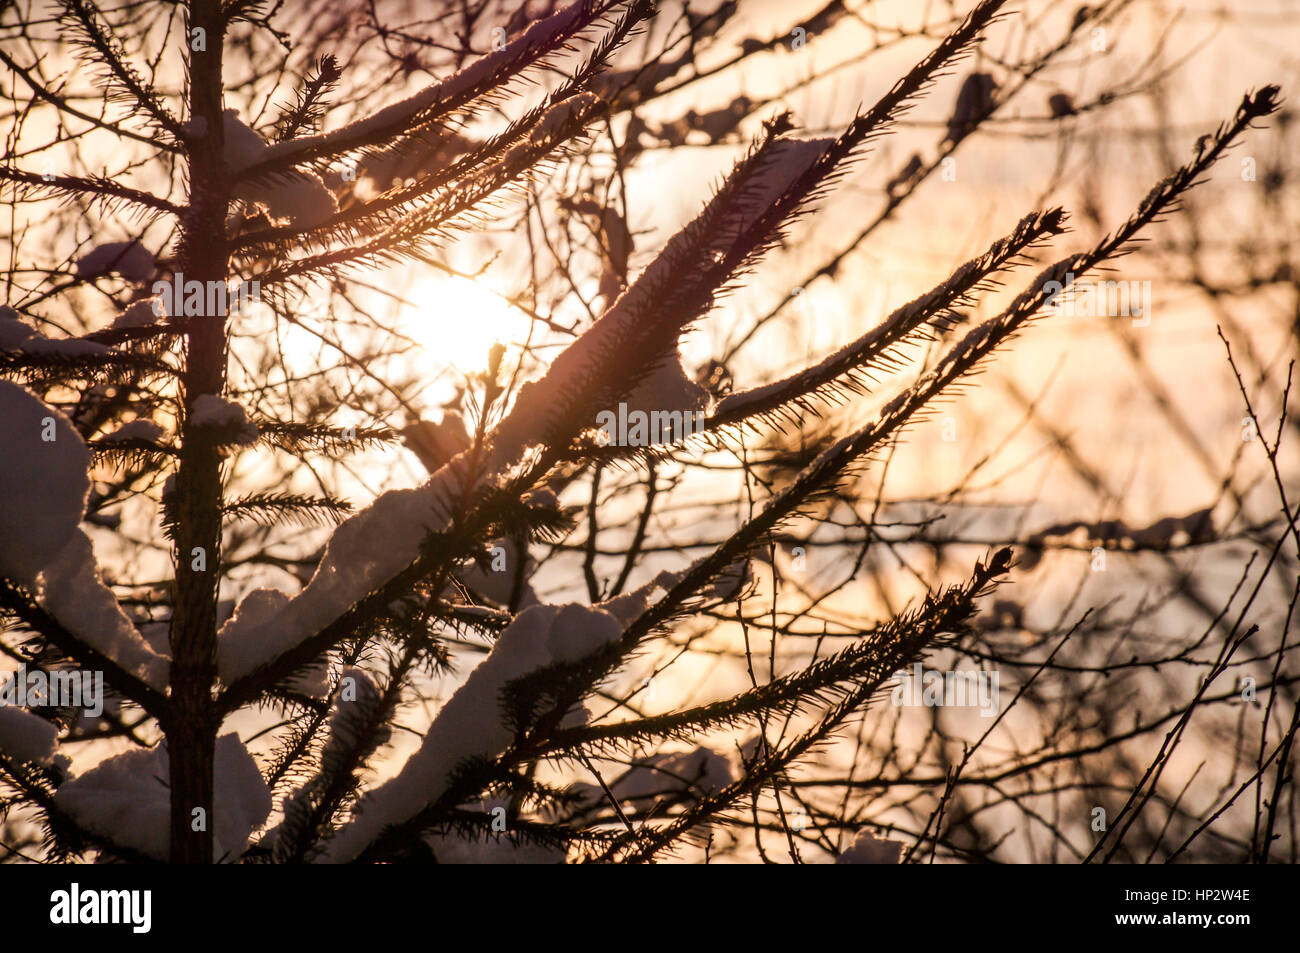 Snow-covered tree branch at sunset Stock Photo